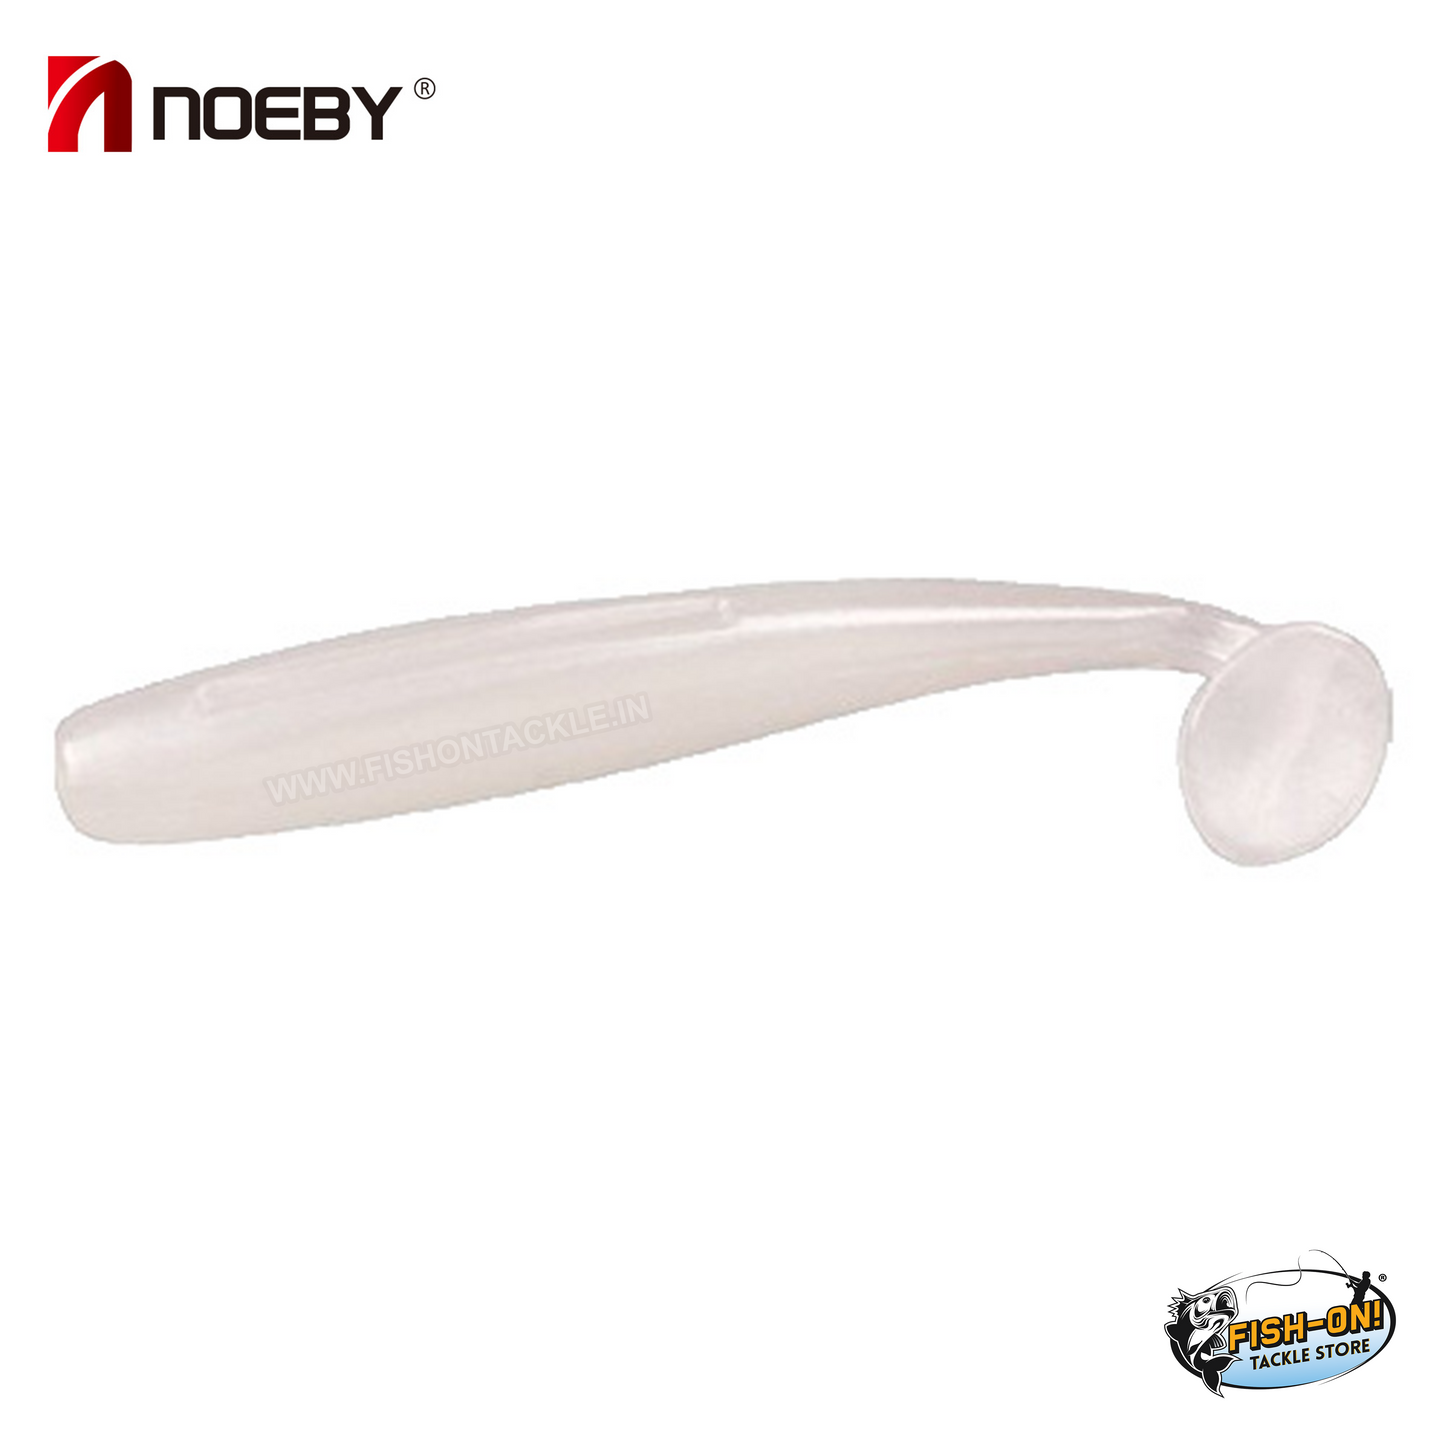 Noeby Shiner Paddle Tail